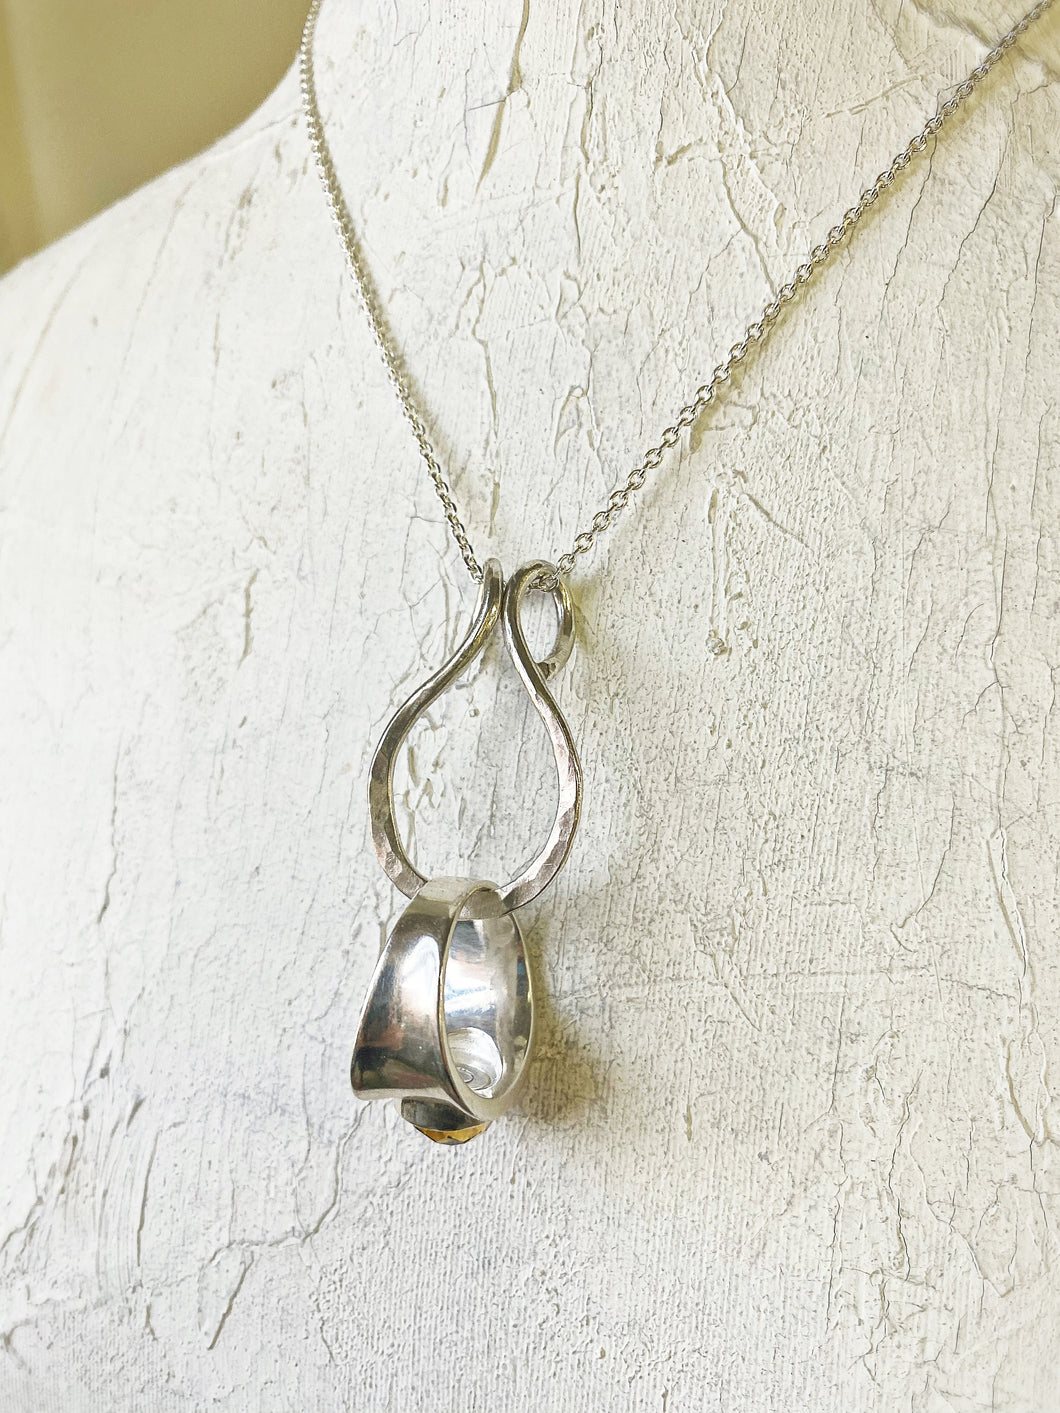 Mia’s Ring-Saving Necklace - Obscuro Jewelry - sterling silver